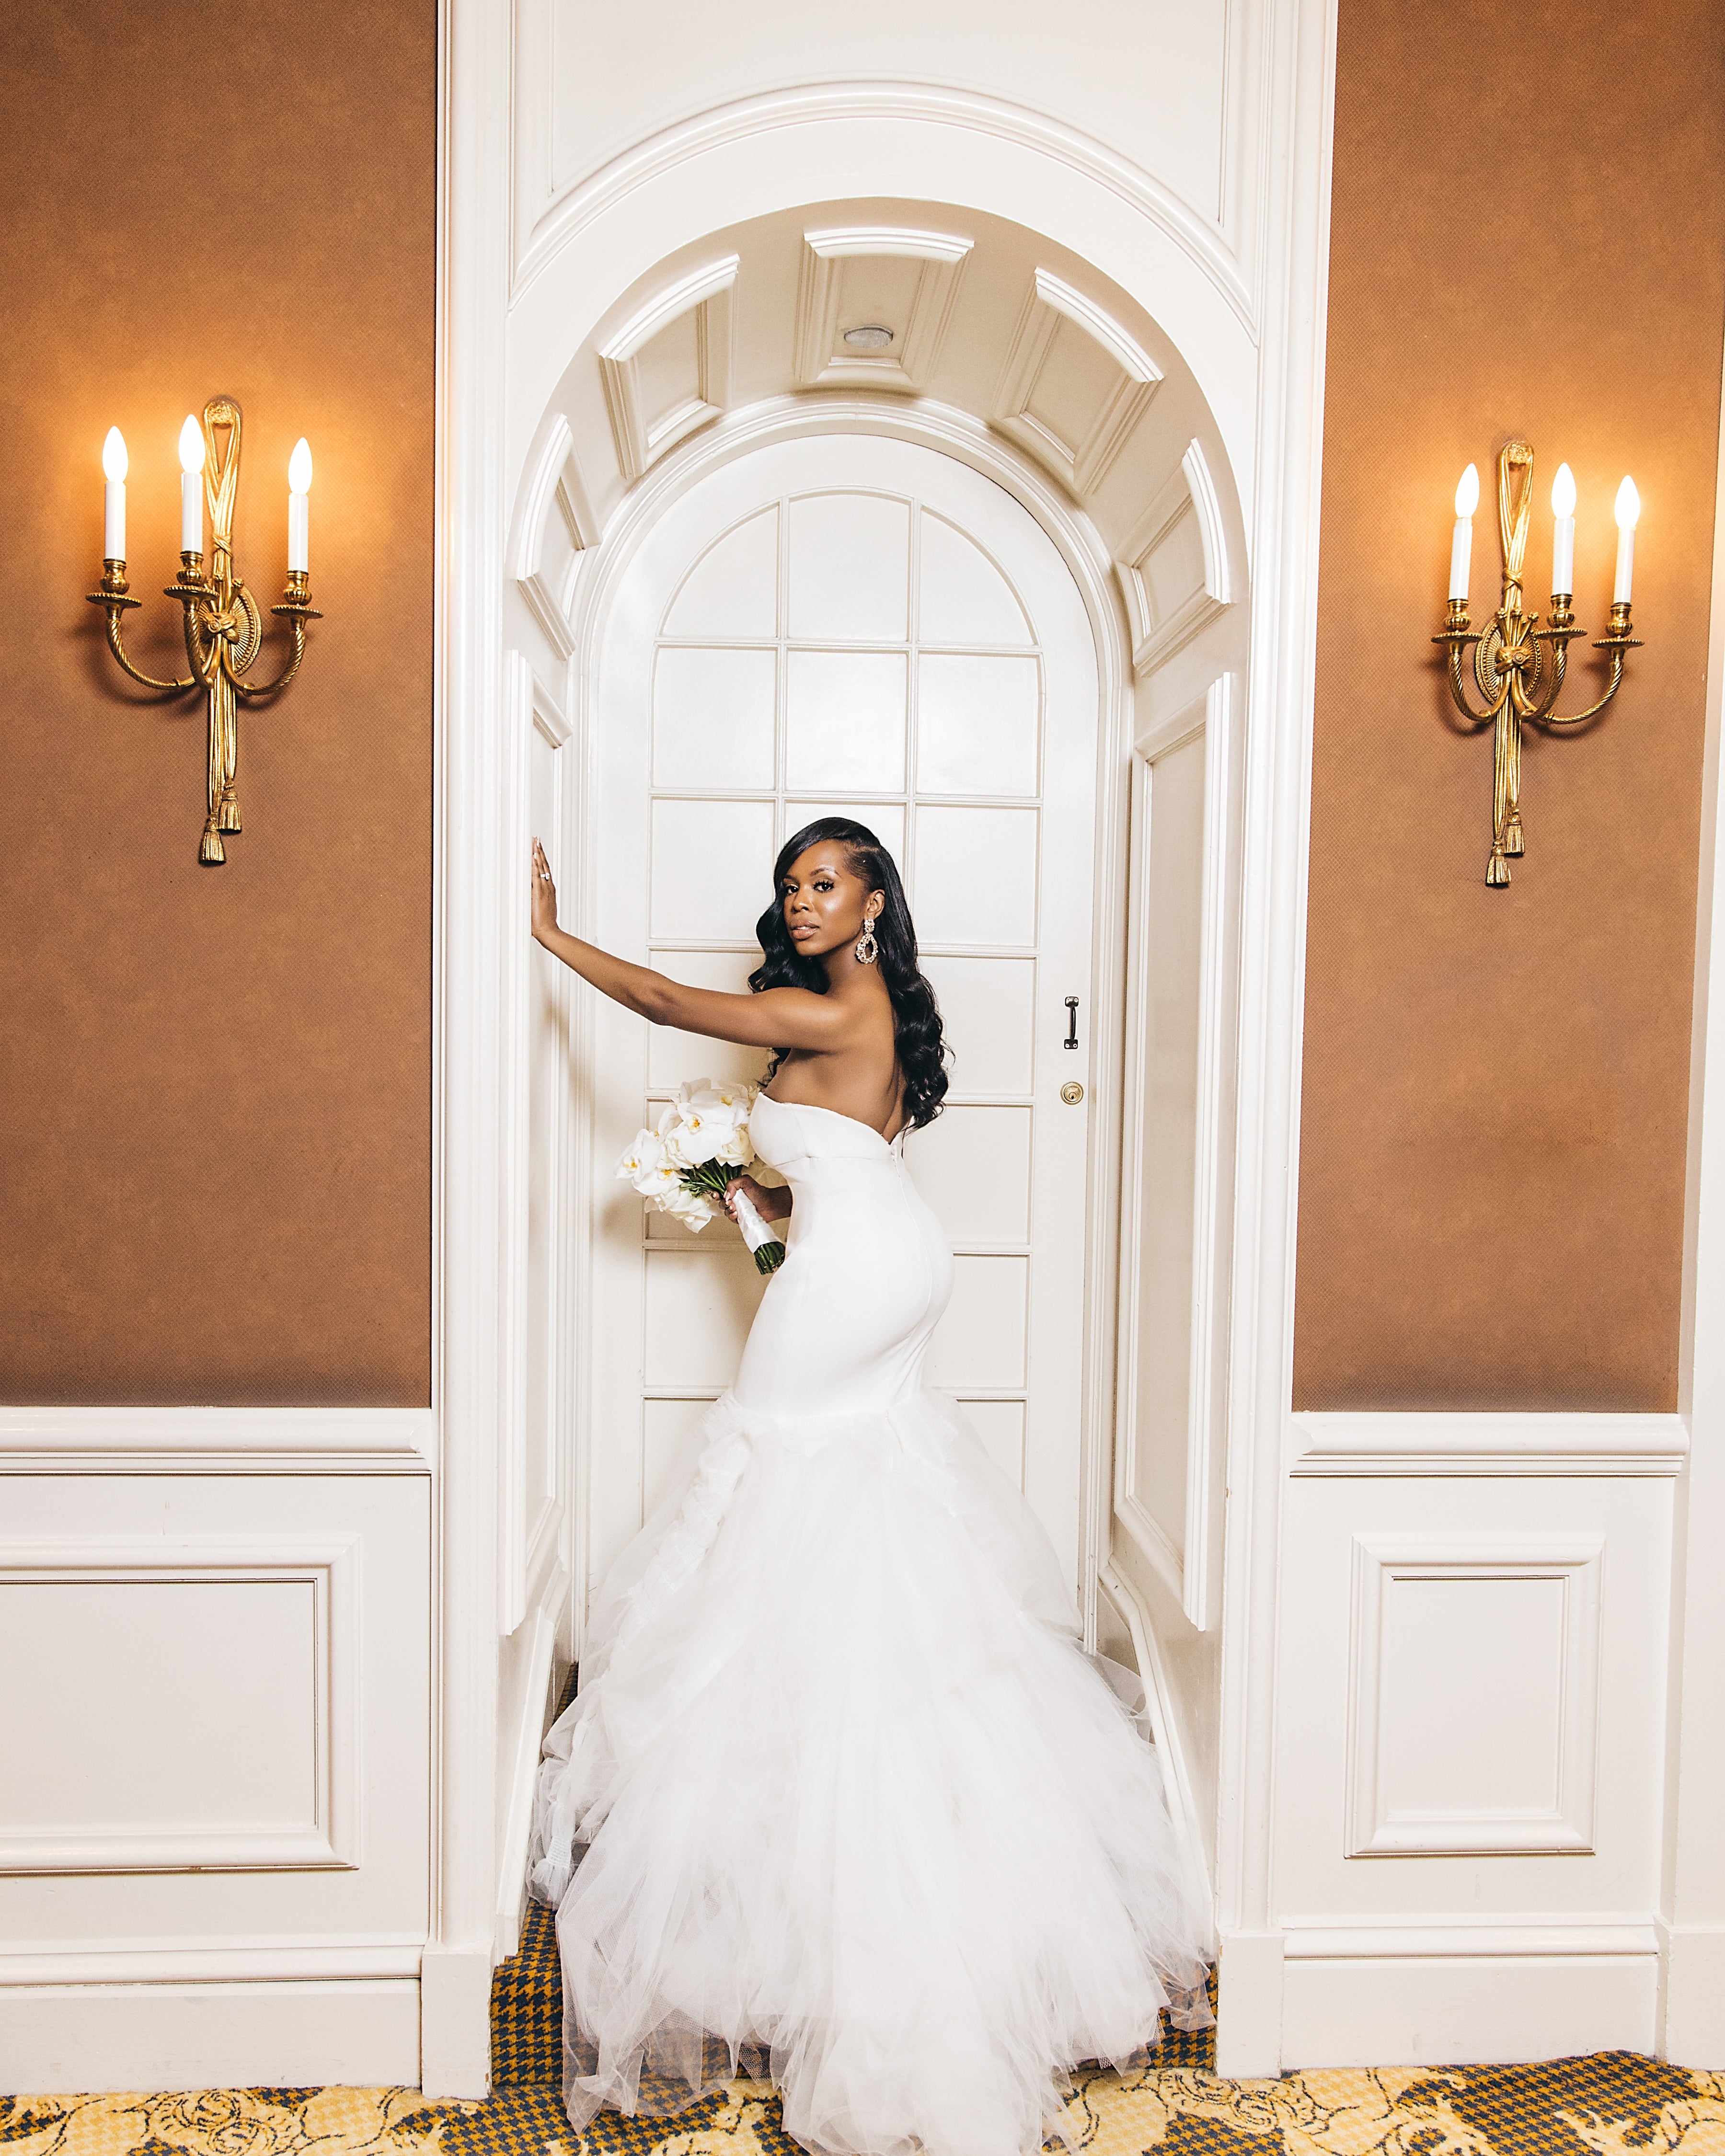 Bridal Bliss: Chloe and Jose's Glam Chicago Wedding Was An Absolute Stunner